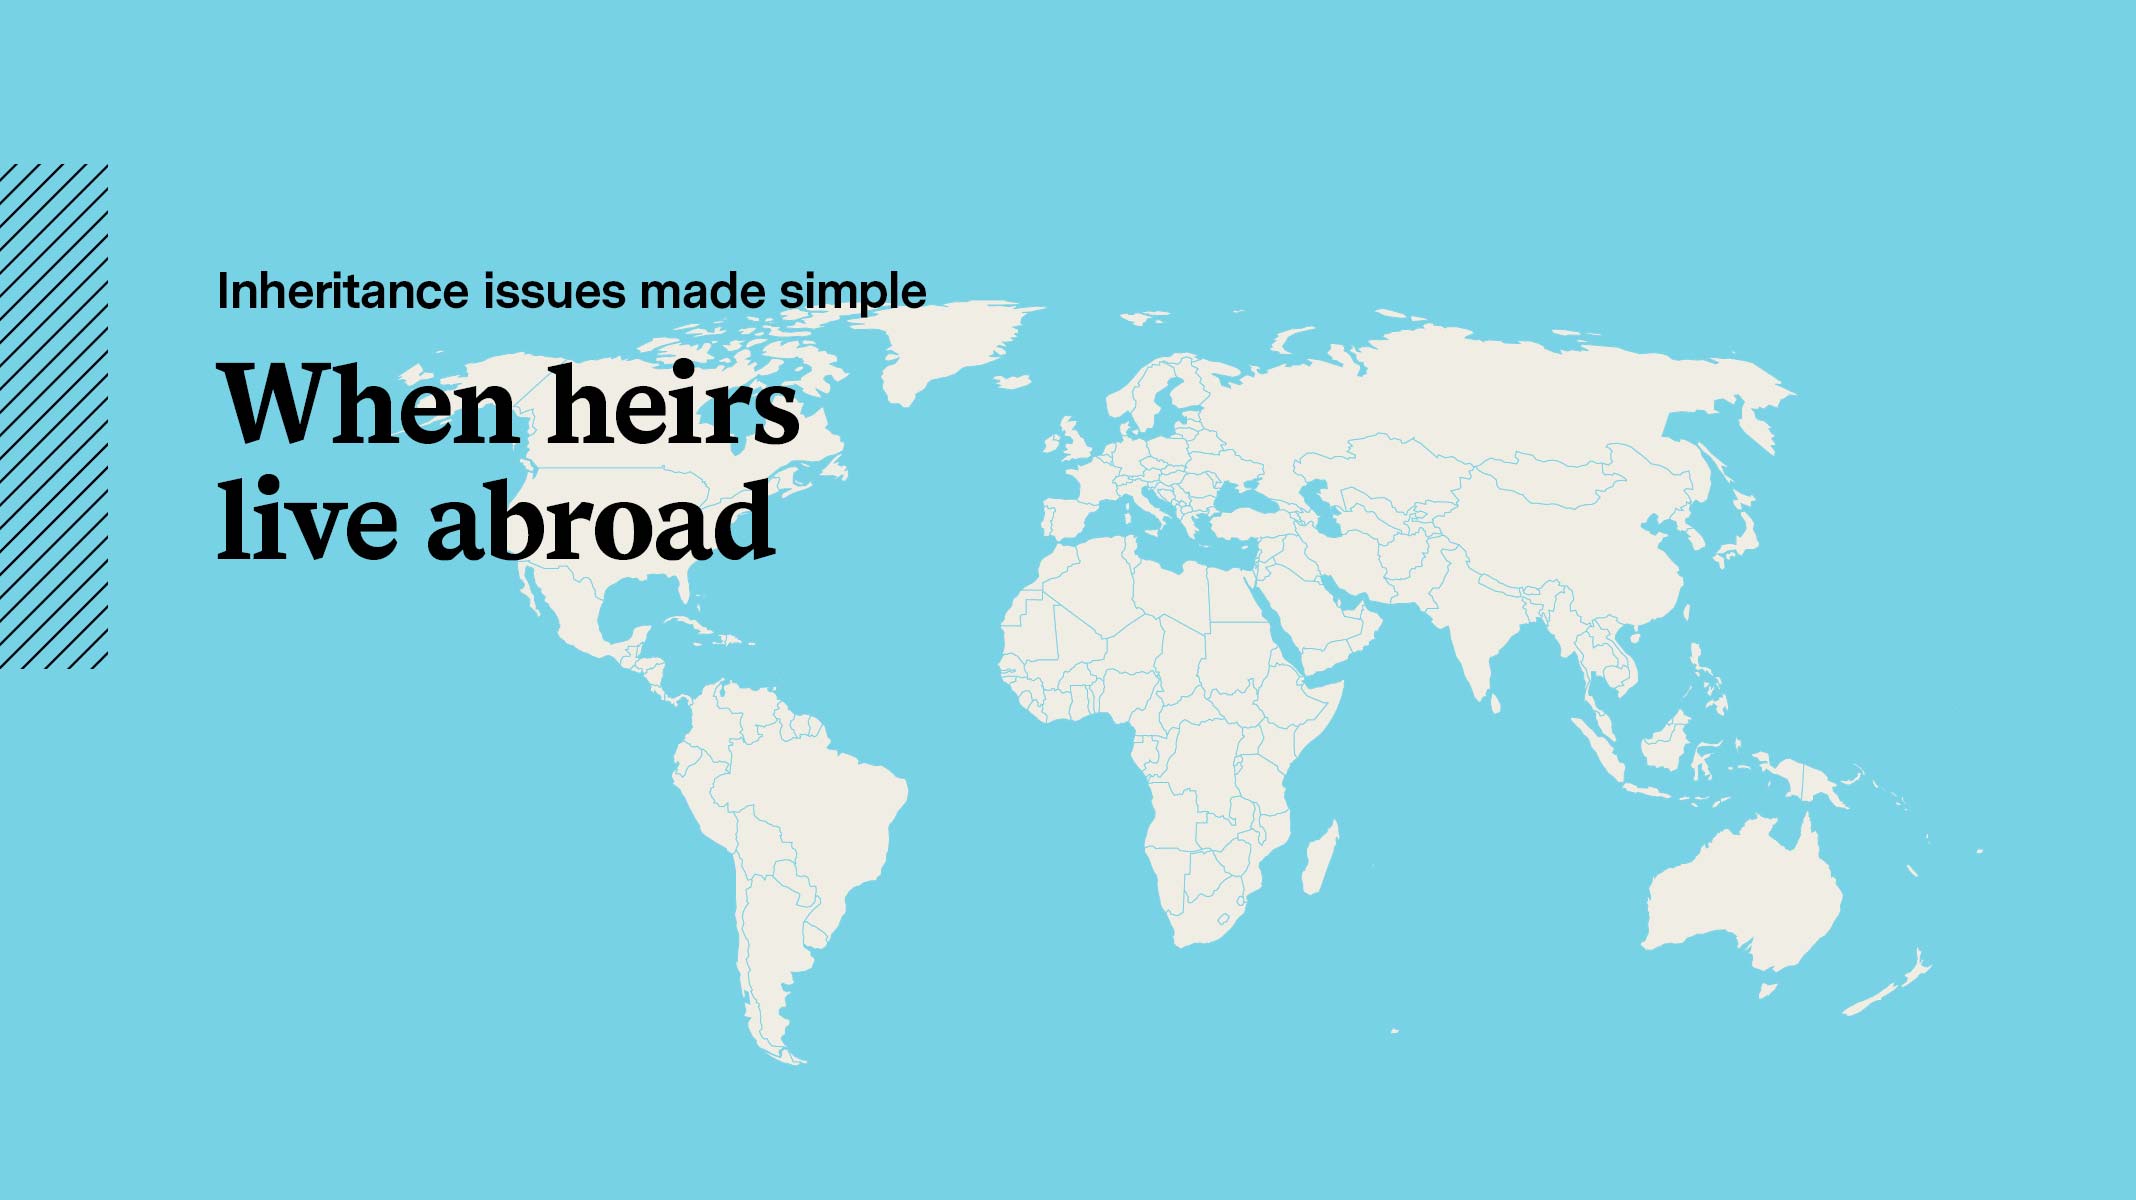 Slide 2: When heirs live abroad